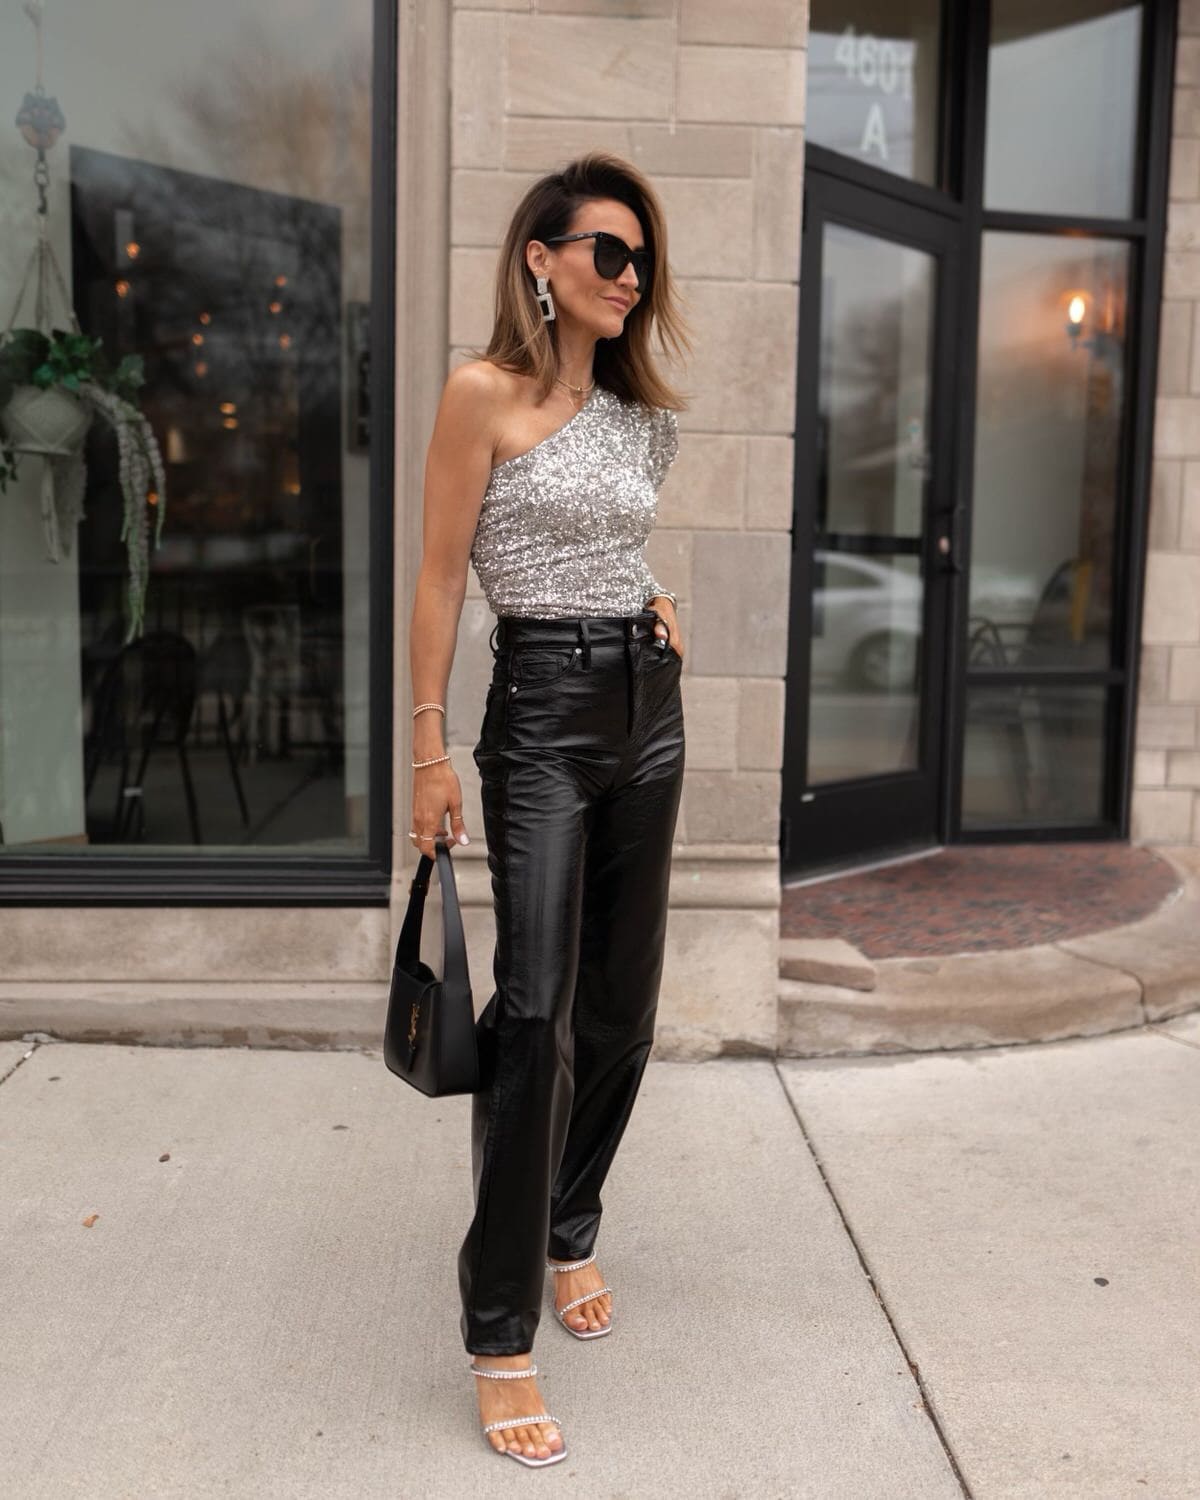 Karina wears Express Faux leather pant and sequin top - Karina